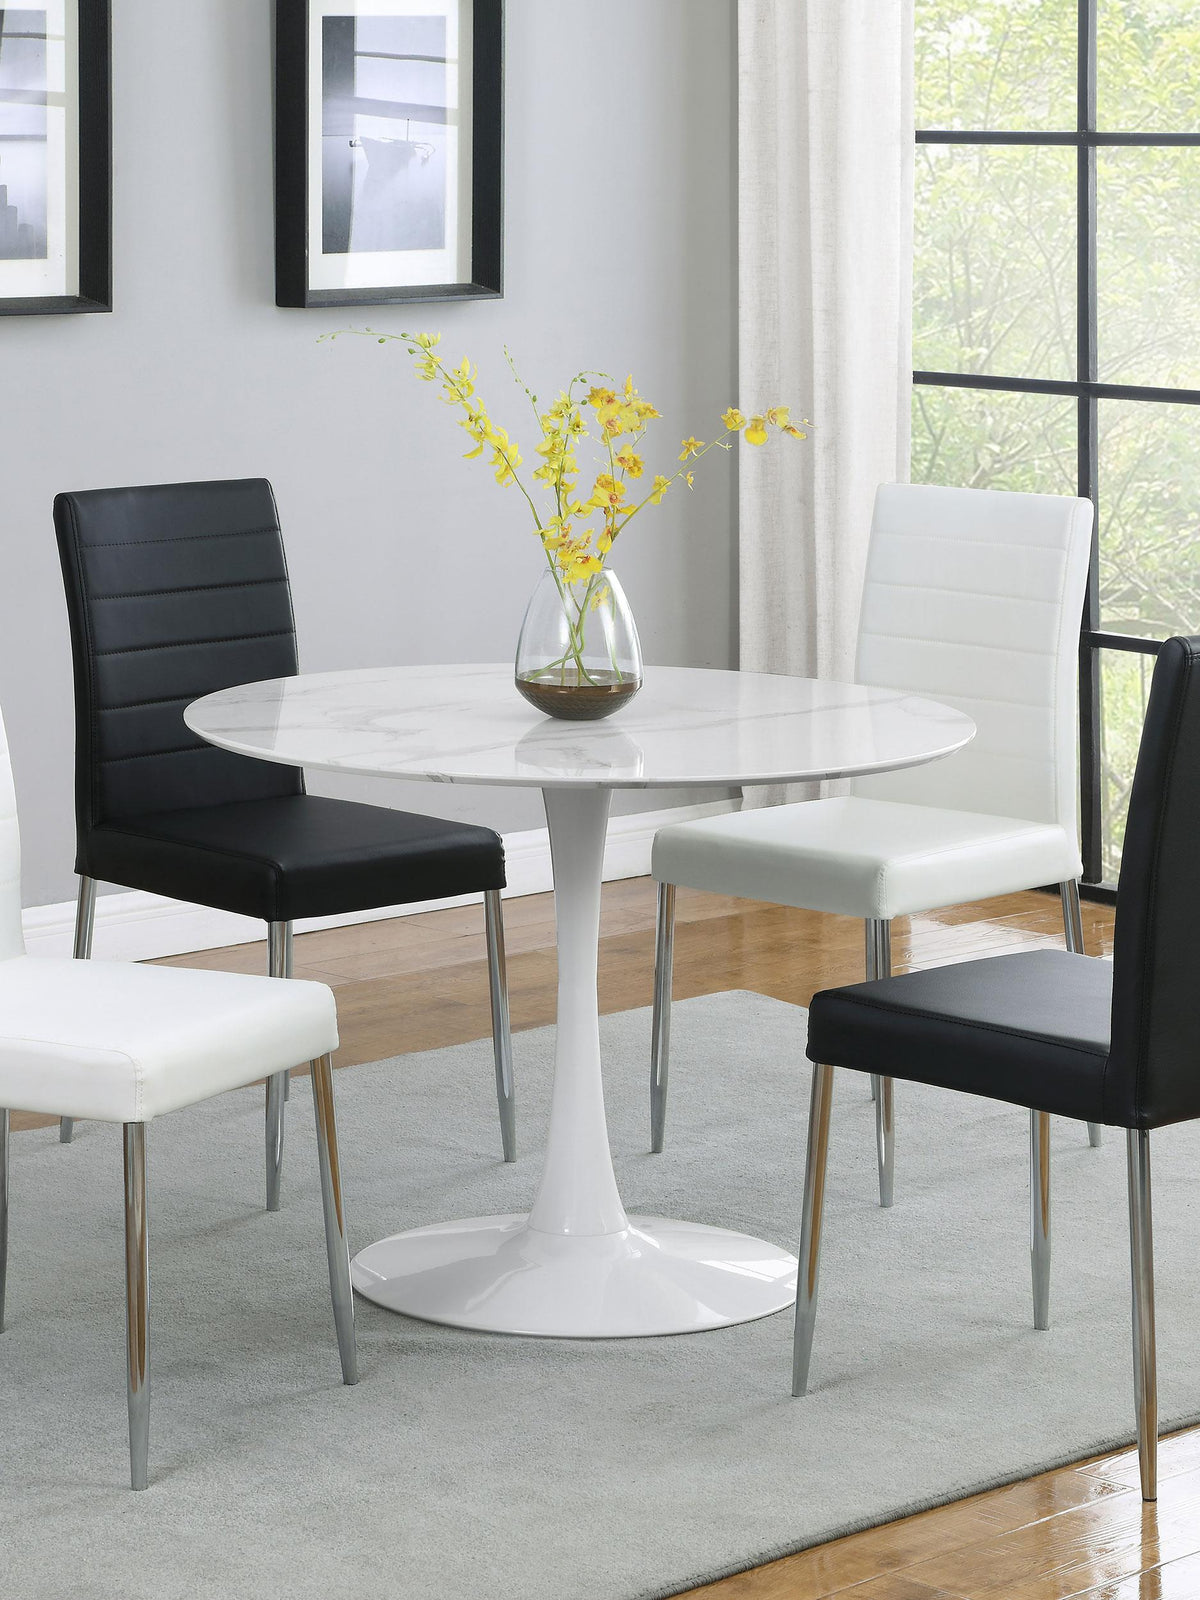 Arkell 40-inch Round Pedestal Dining Table White  Las Vegas Furniture Stores